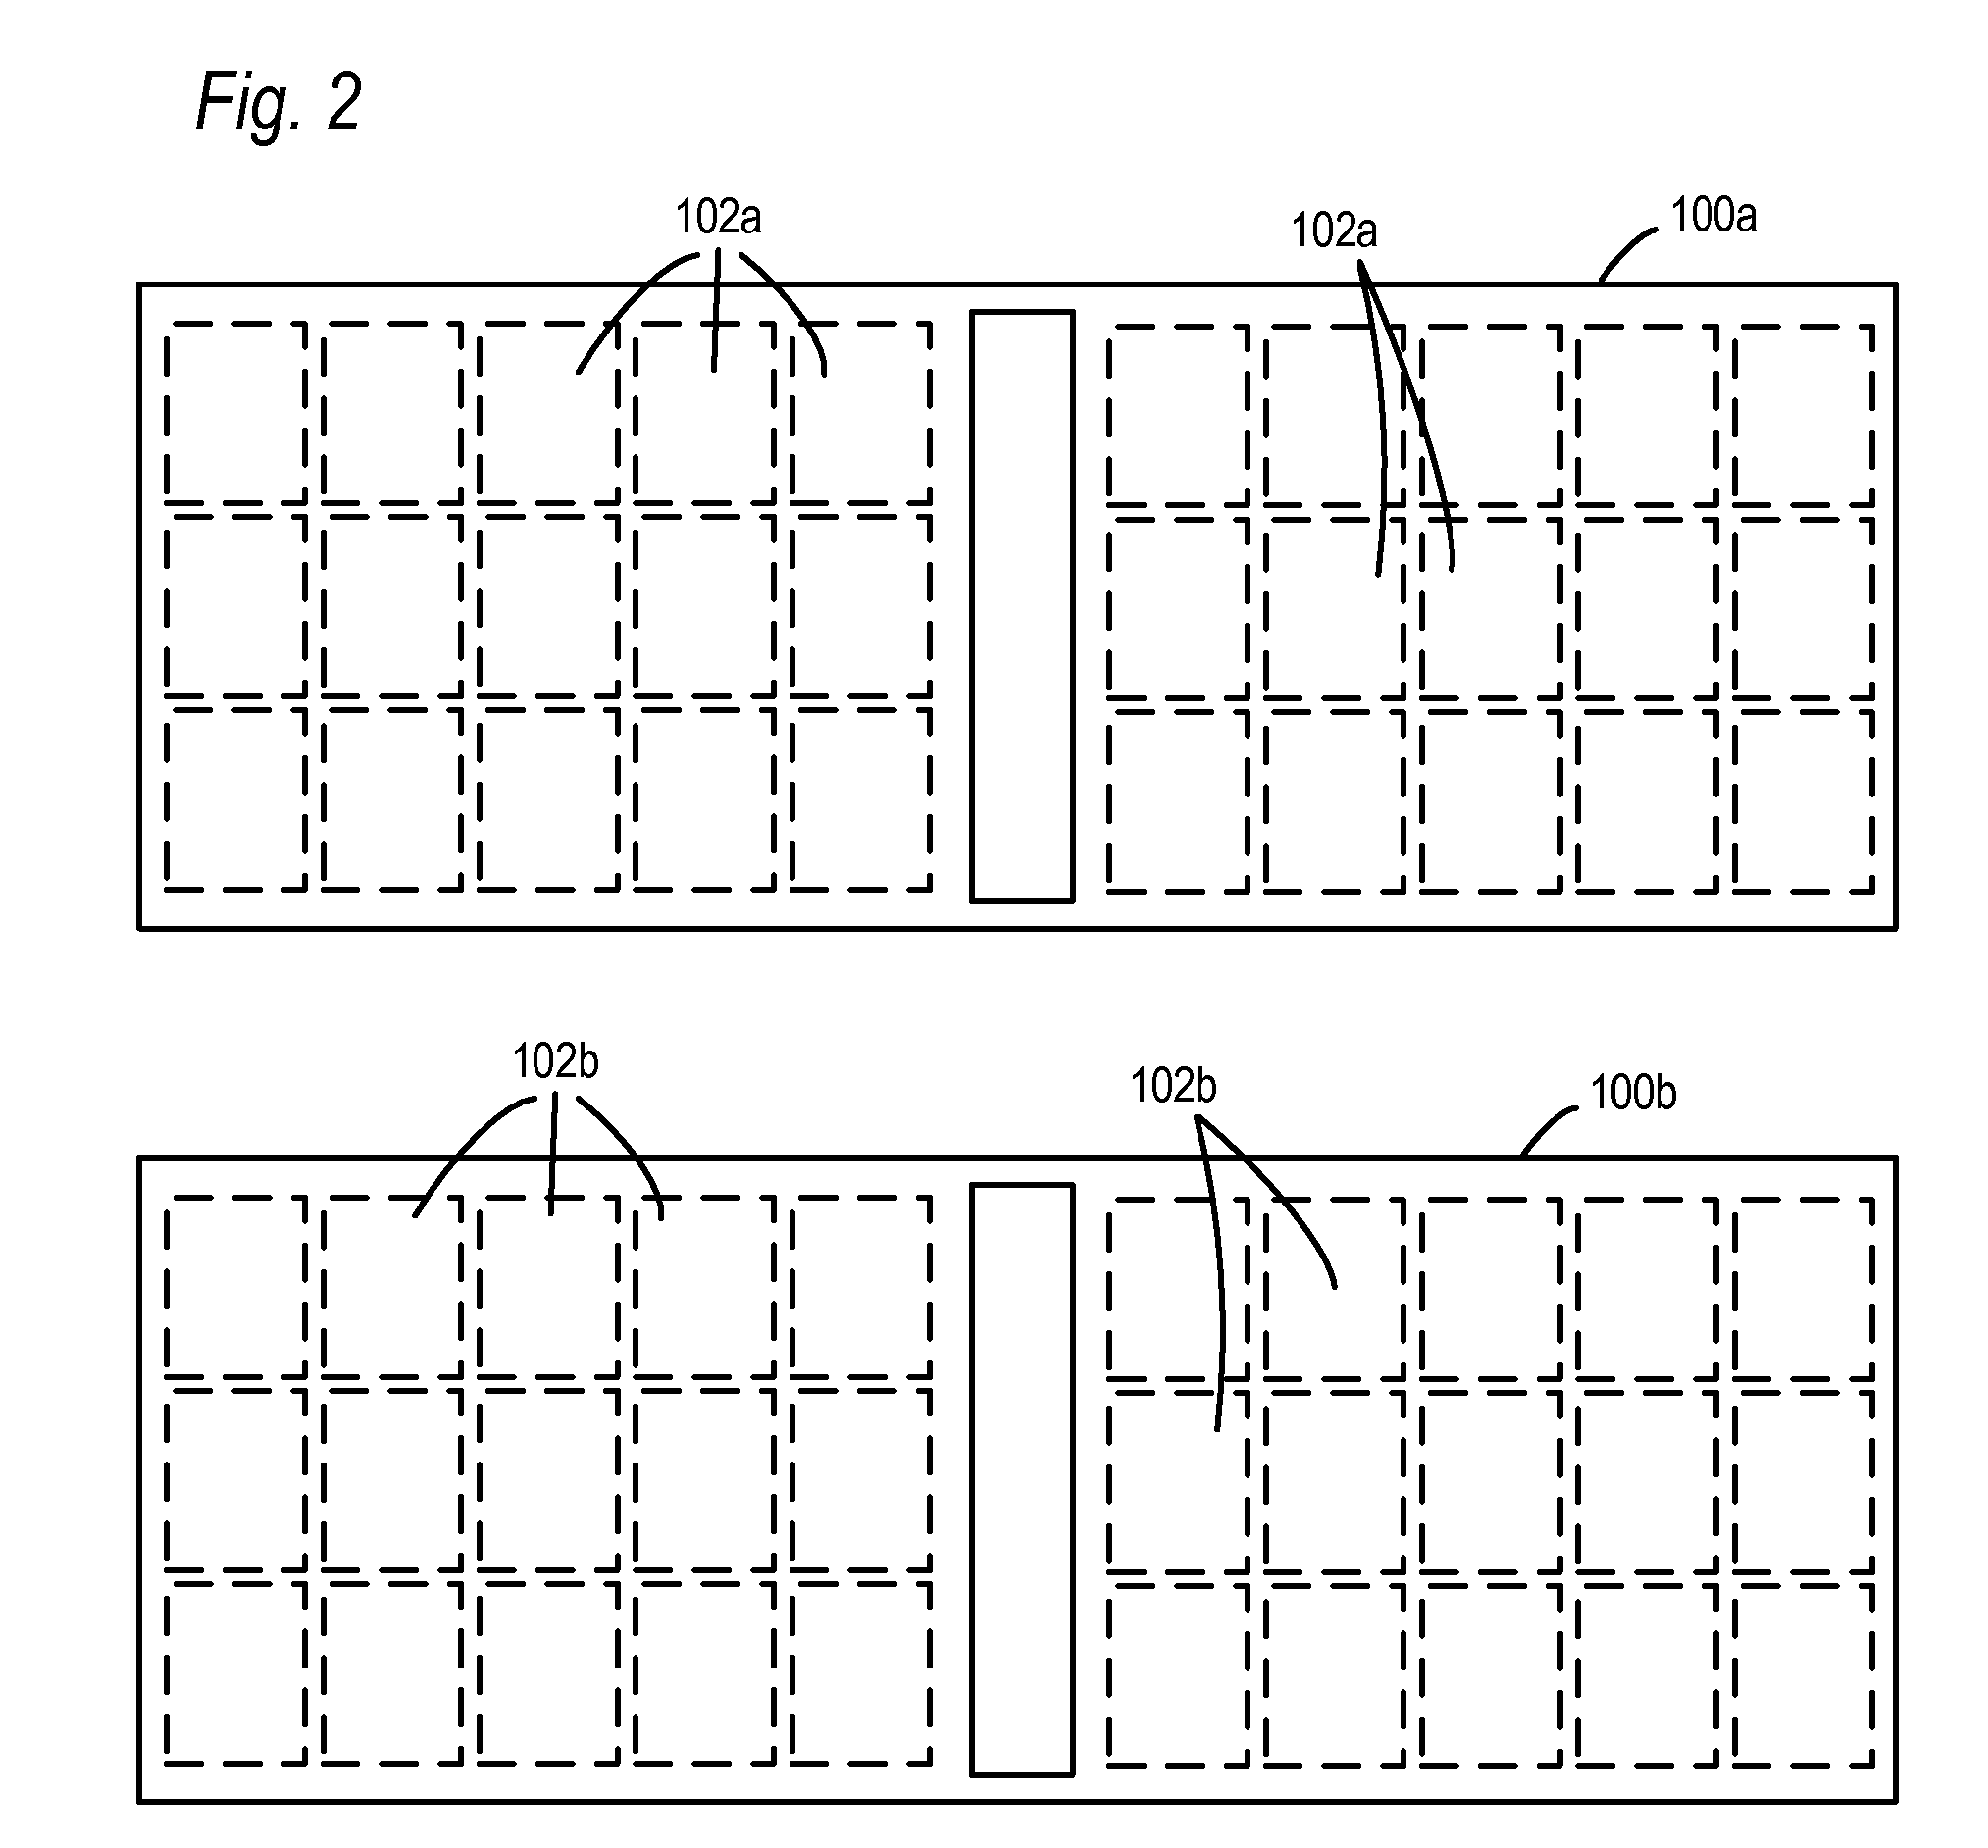 Stacked, interconnected semiconductor packages